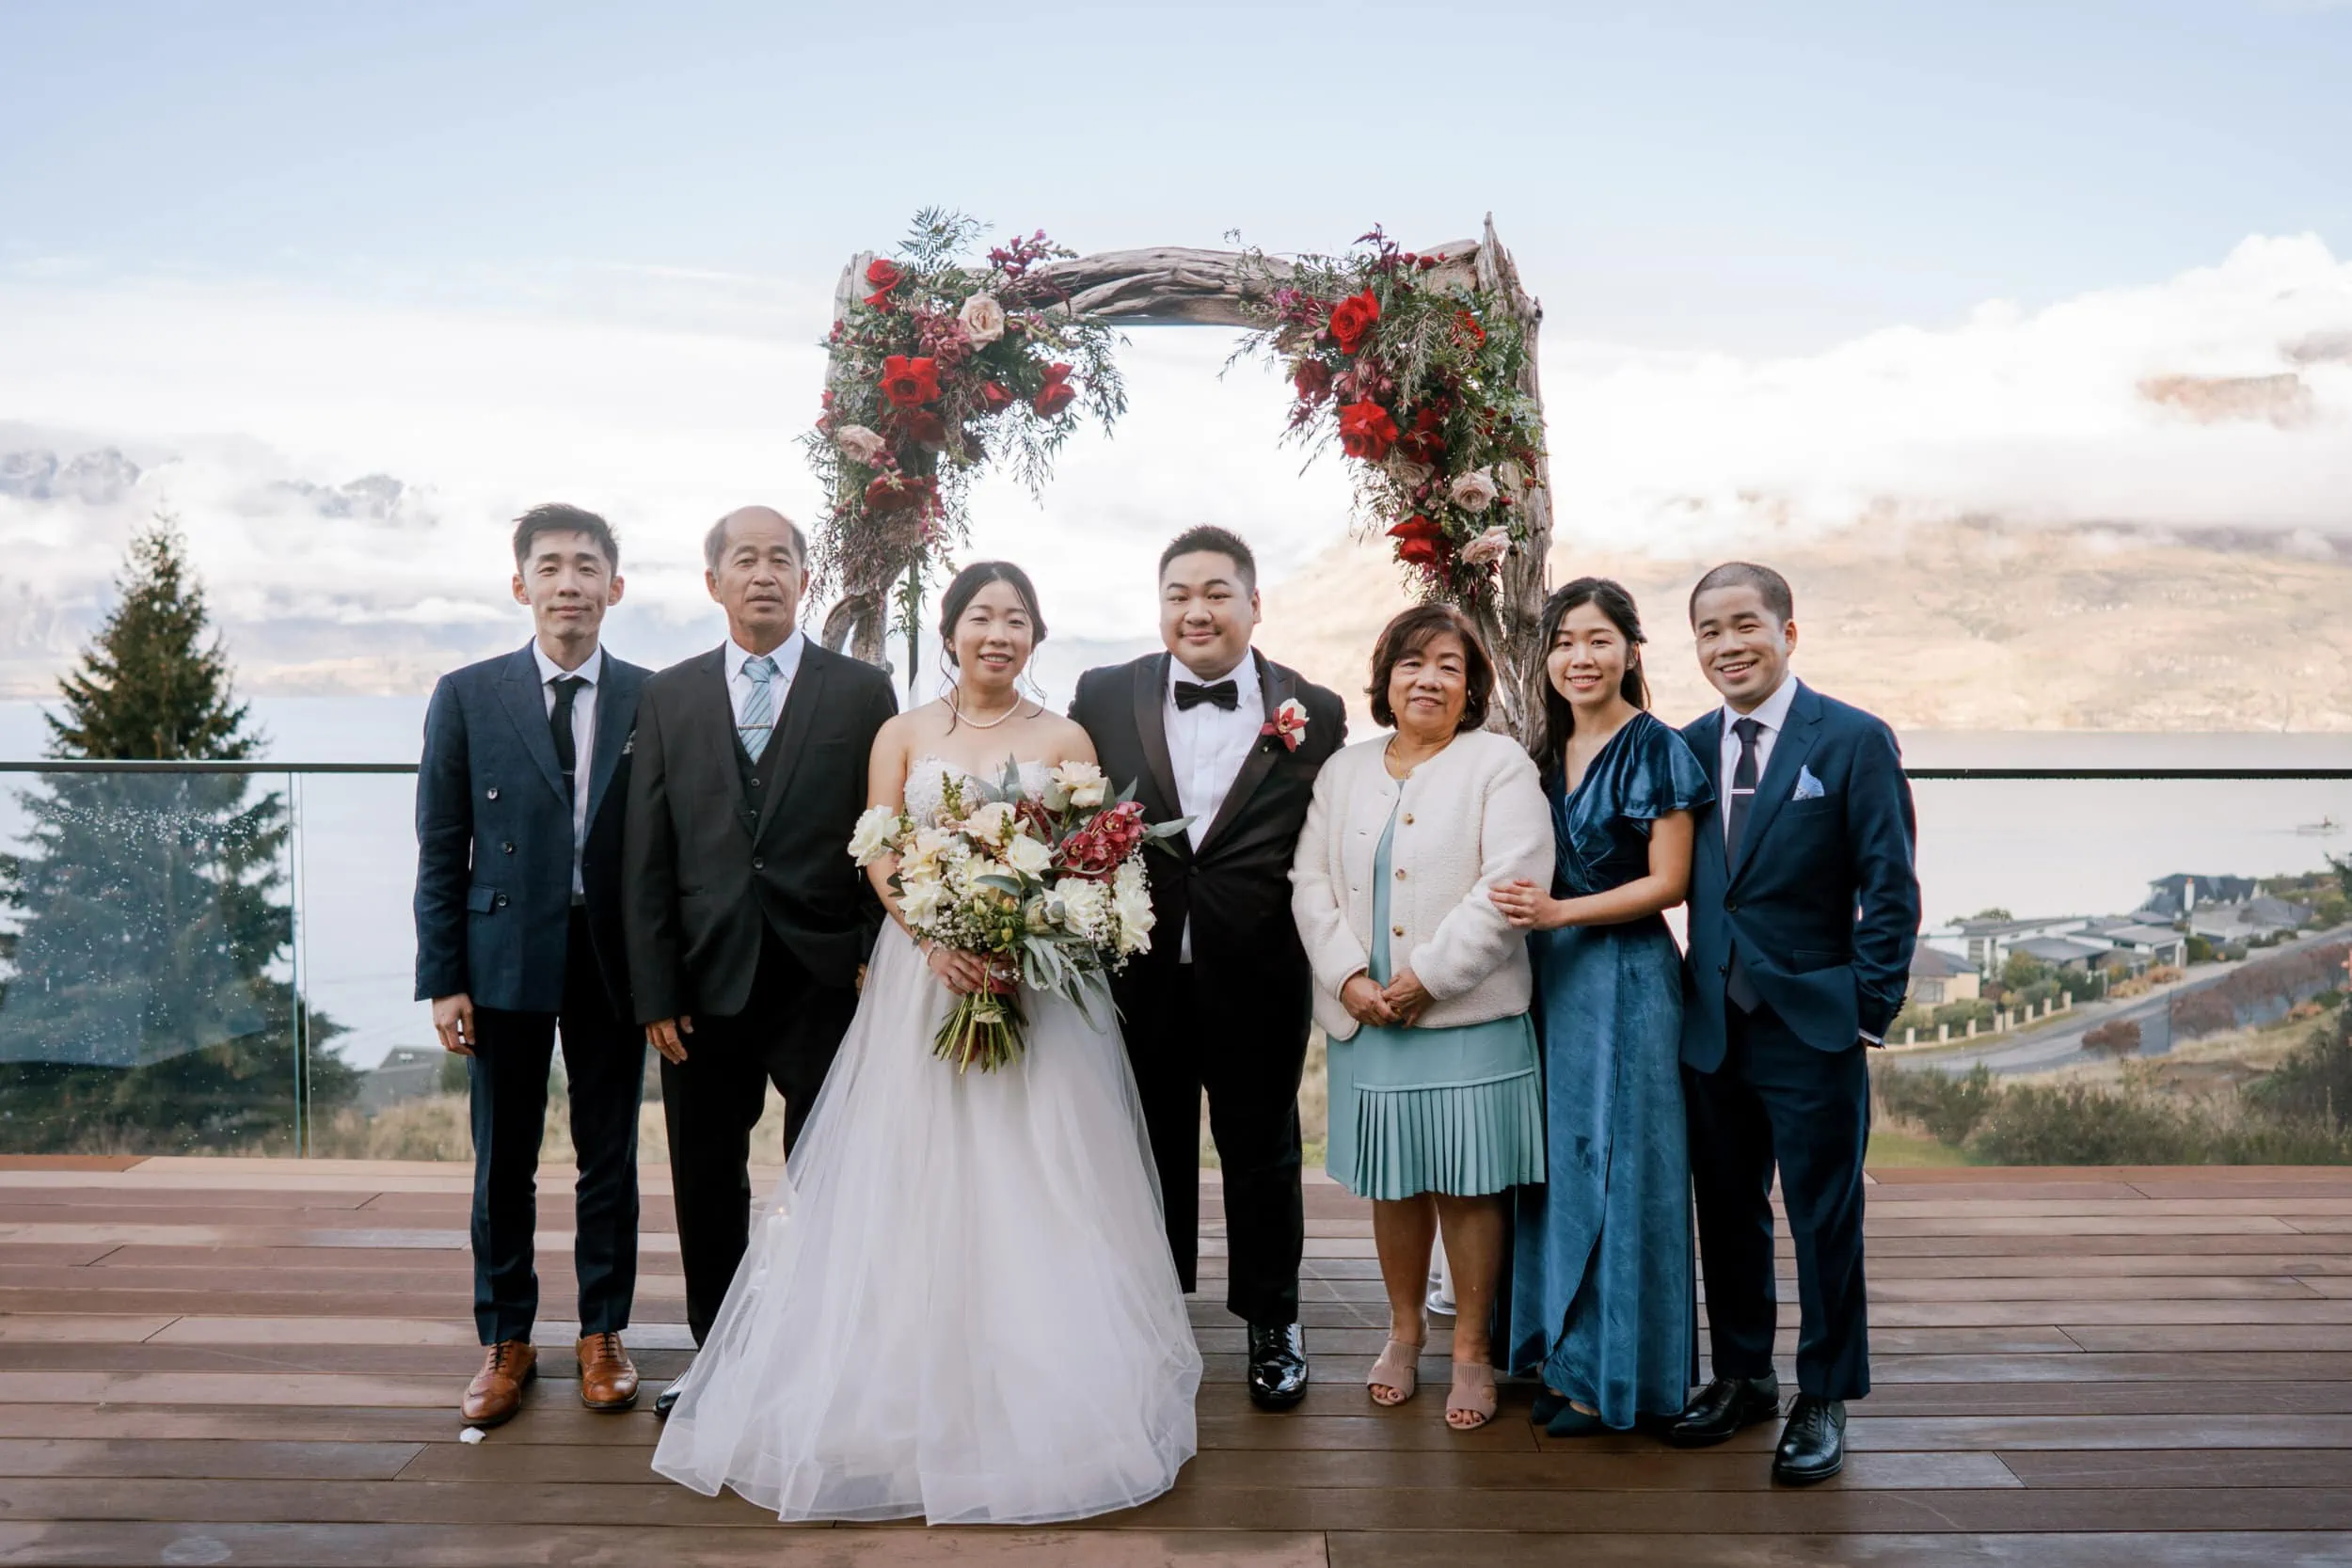 Queenstown New Zealand Elopement Wedding Photographer - Lam and Wendy's wedding party posing for a photo on a deck overlooking Lake Wanaka at Kamana Lakehouse.